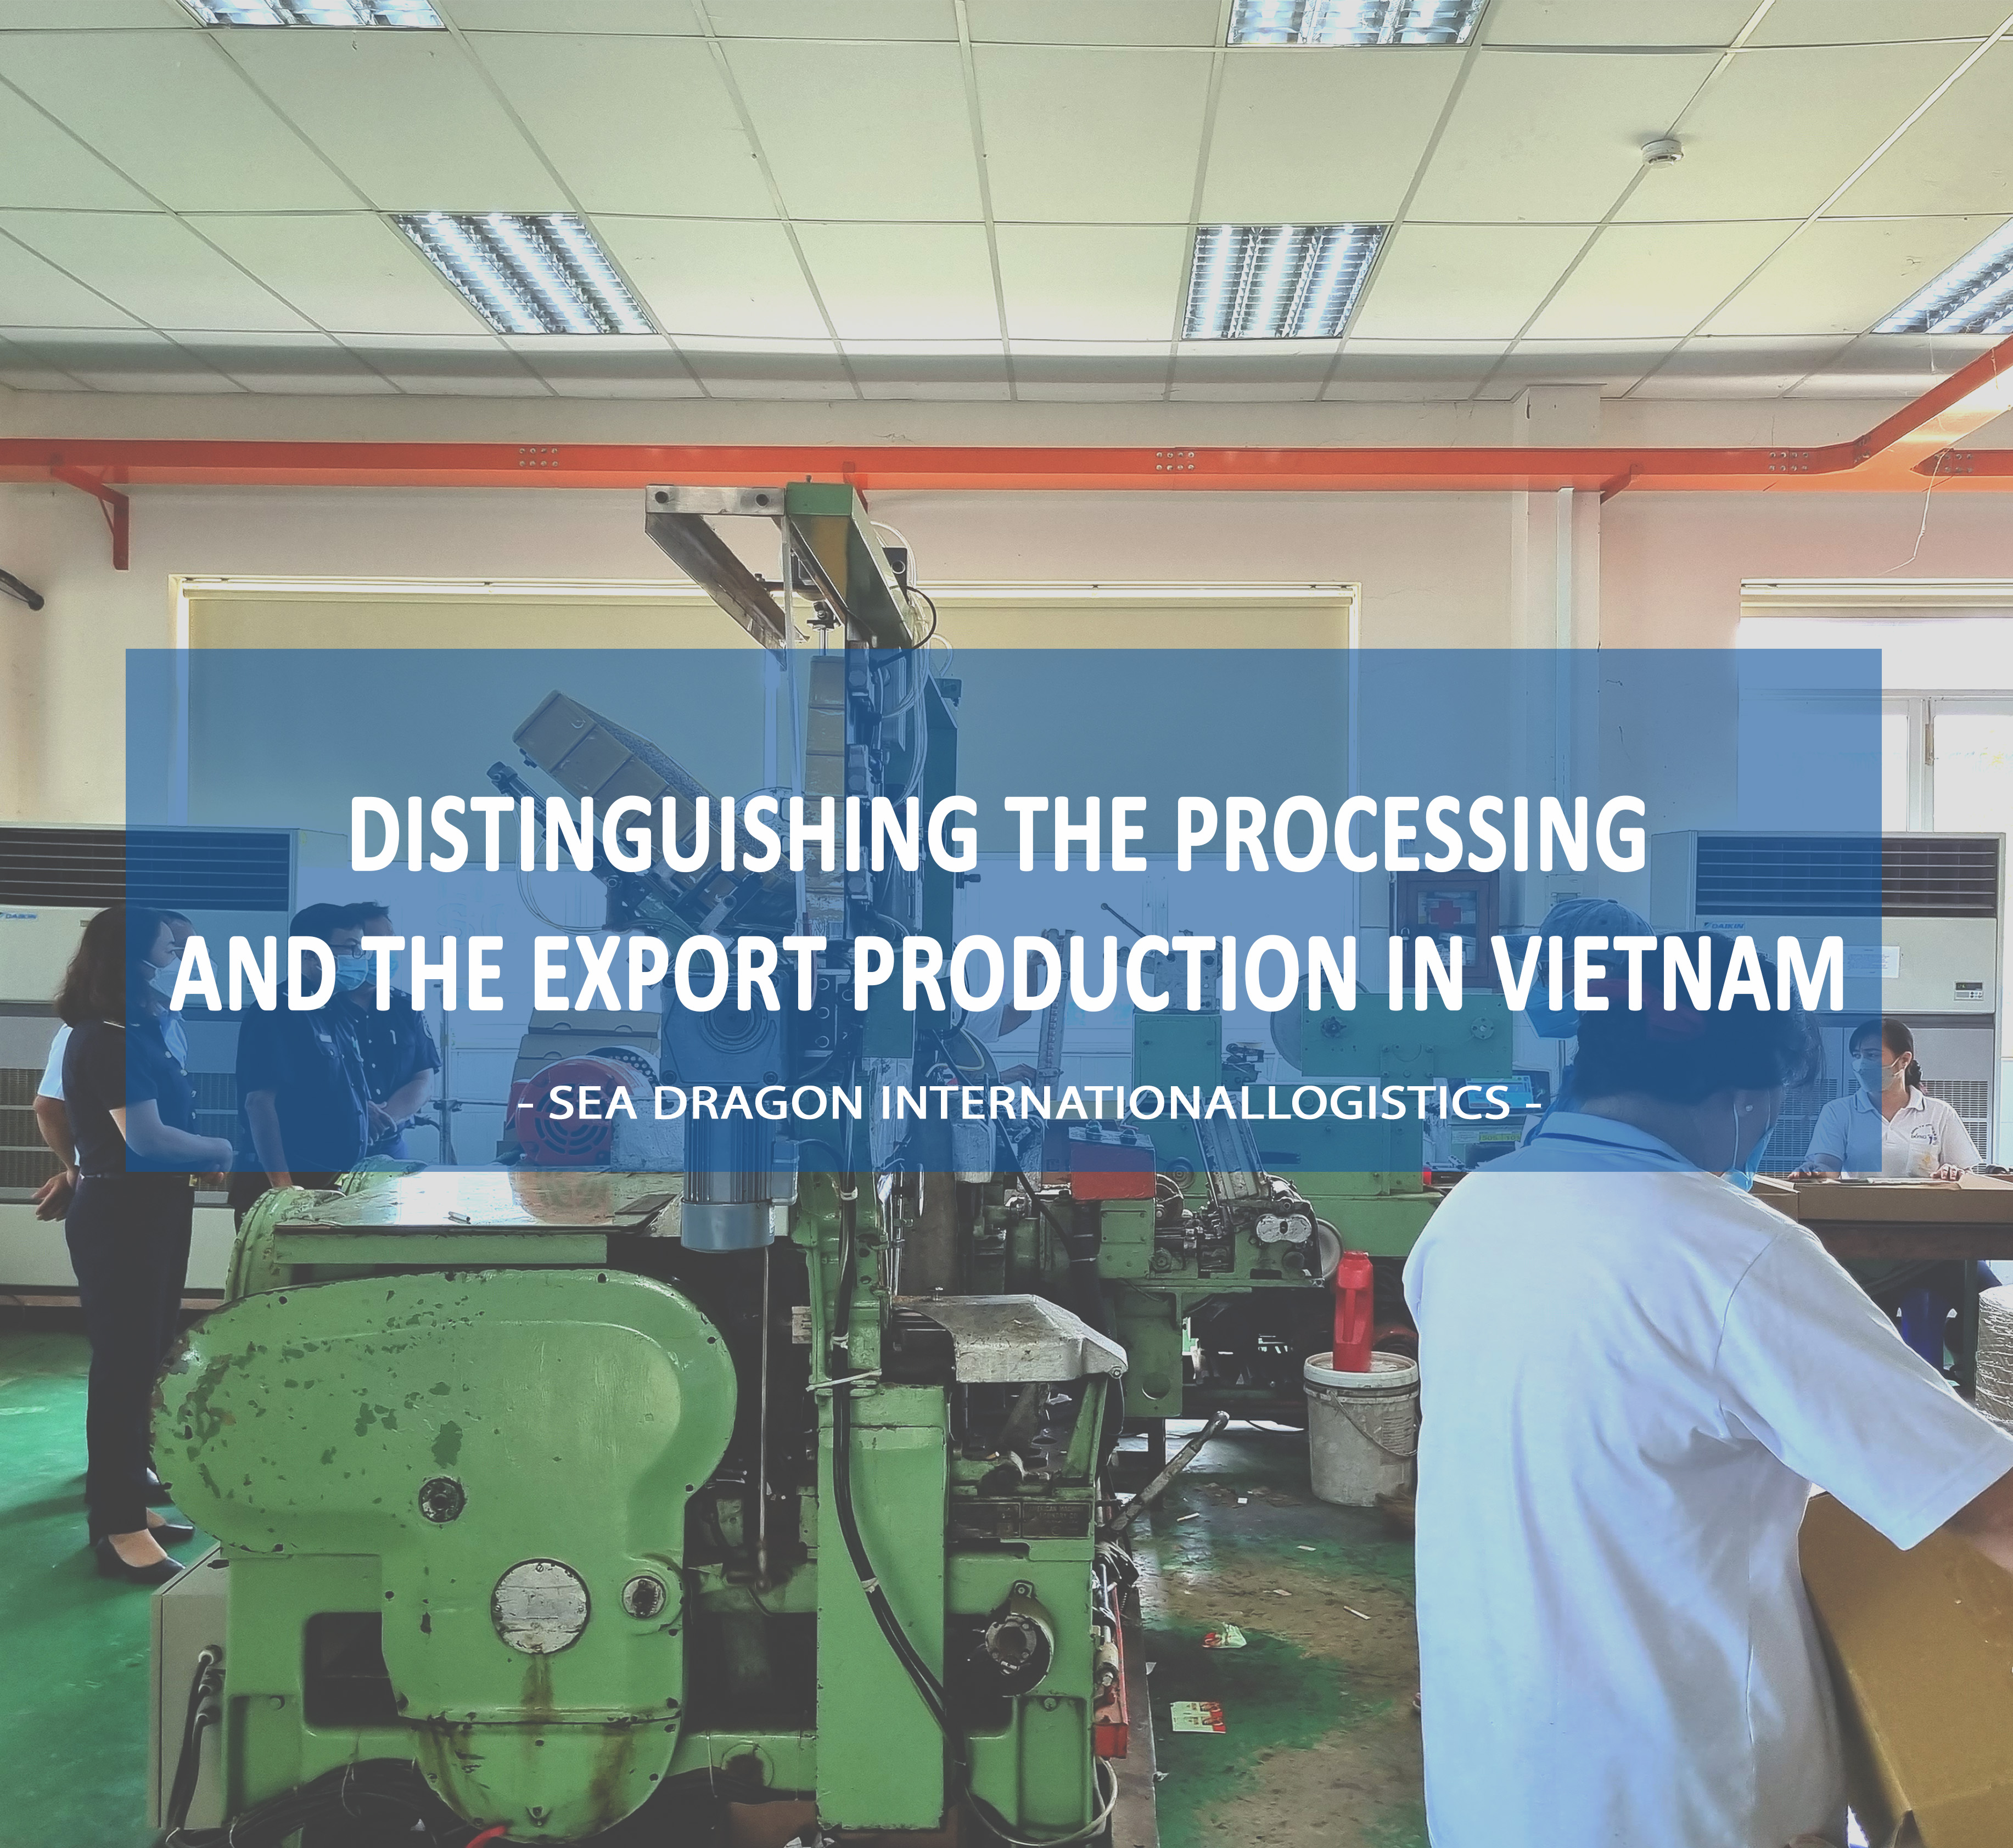 DISTINGUISHING THE PROCESSING AND THE EXPORT PRODUCTION IN VIETNAM